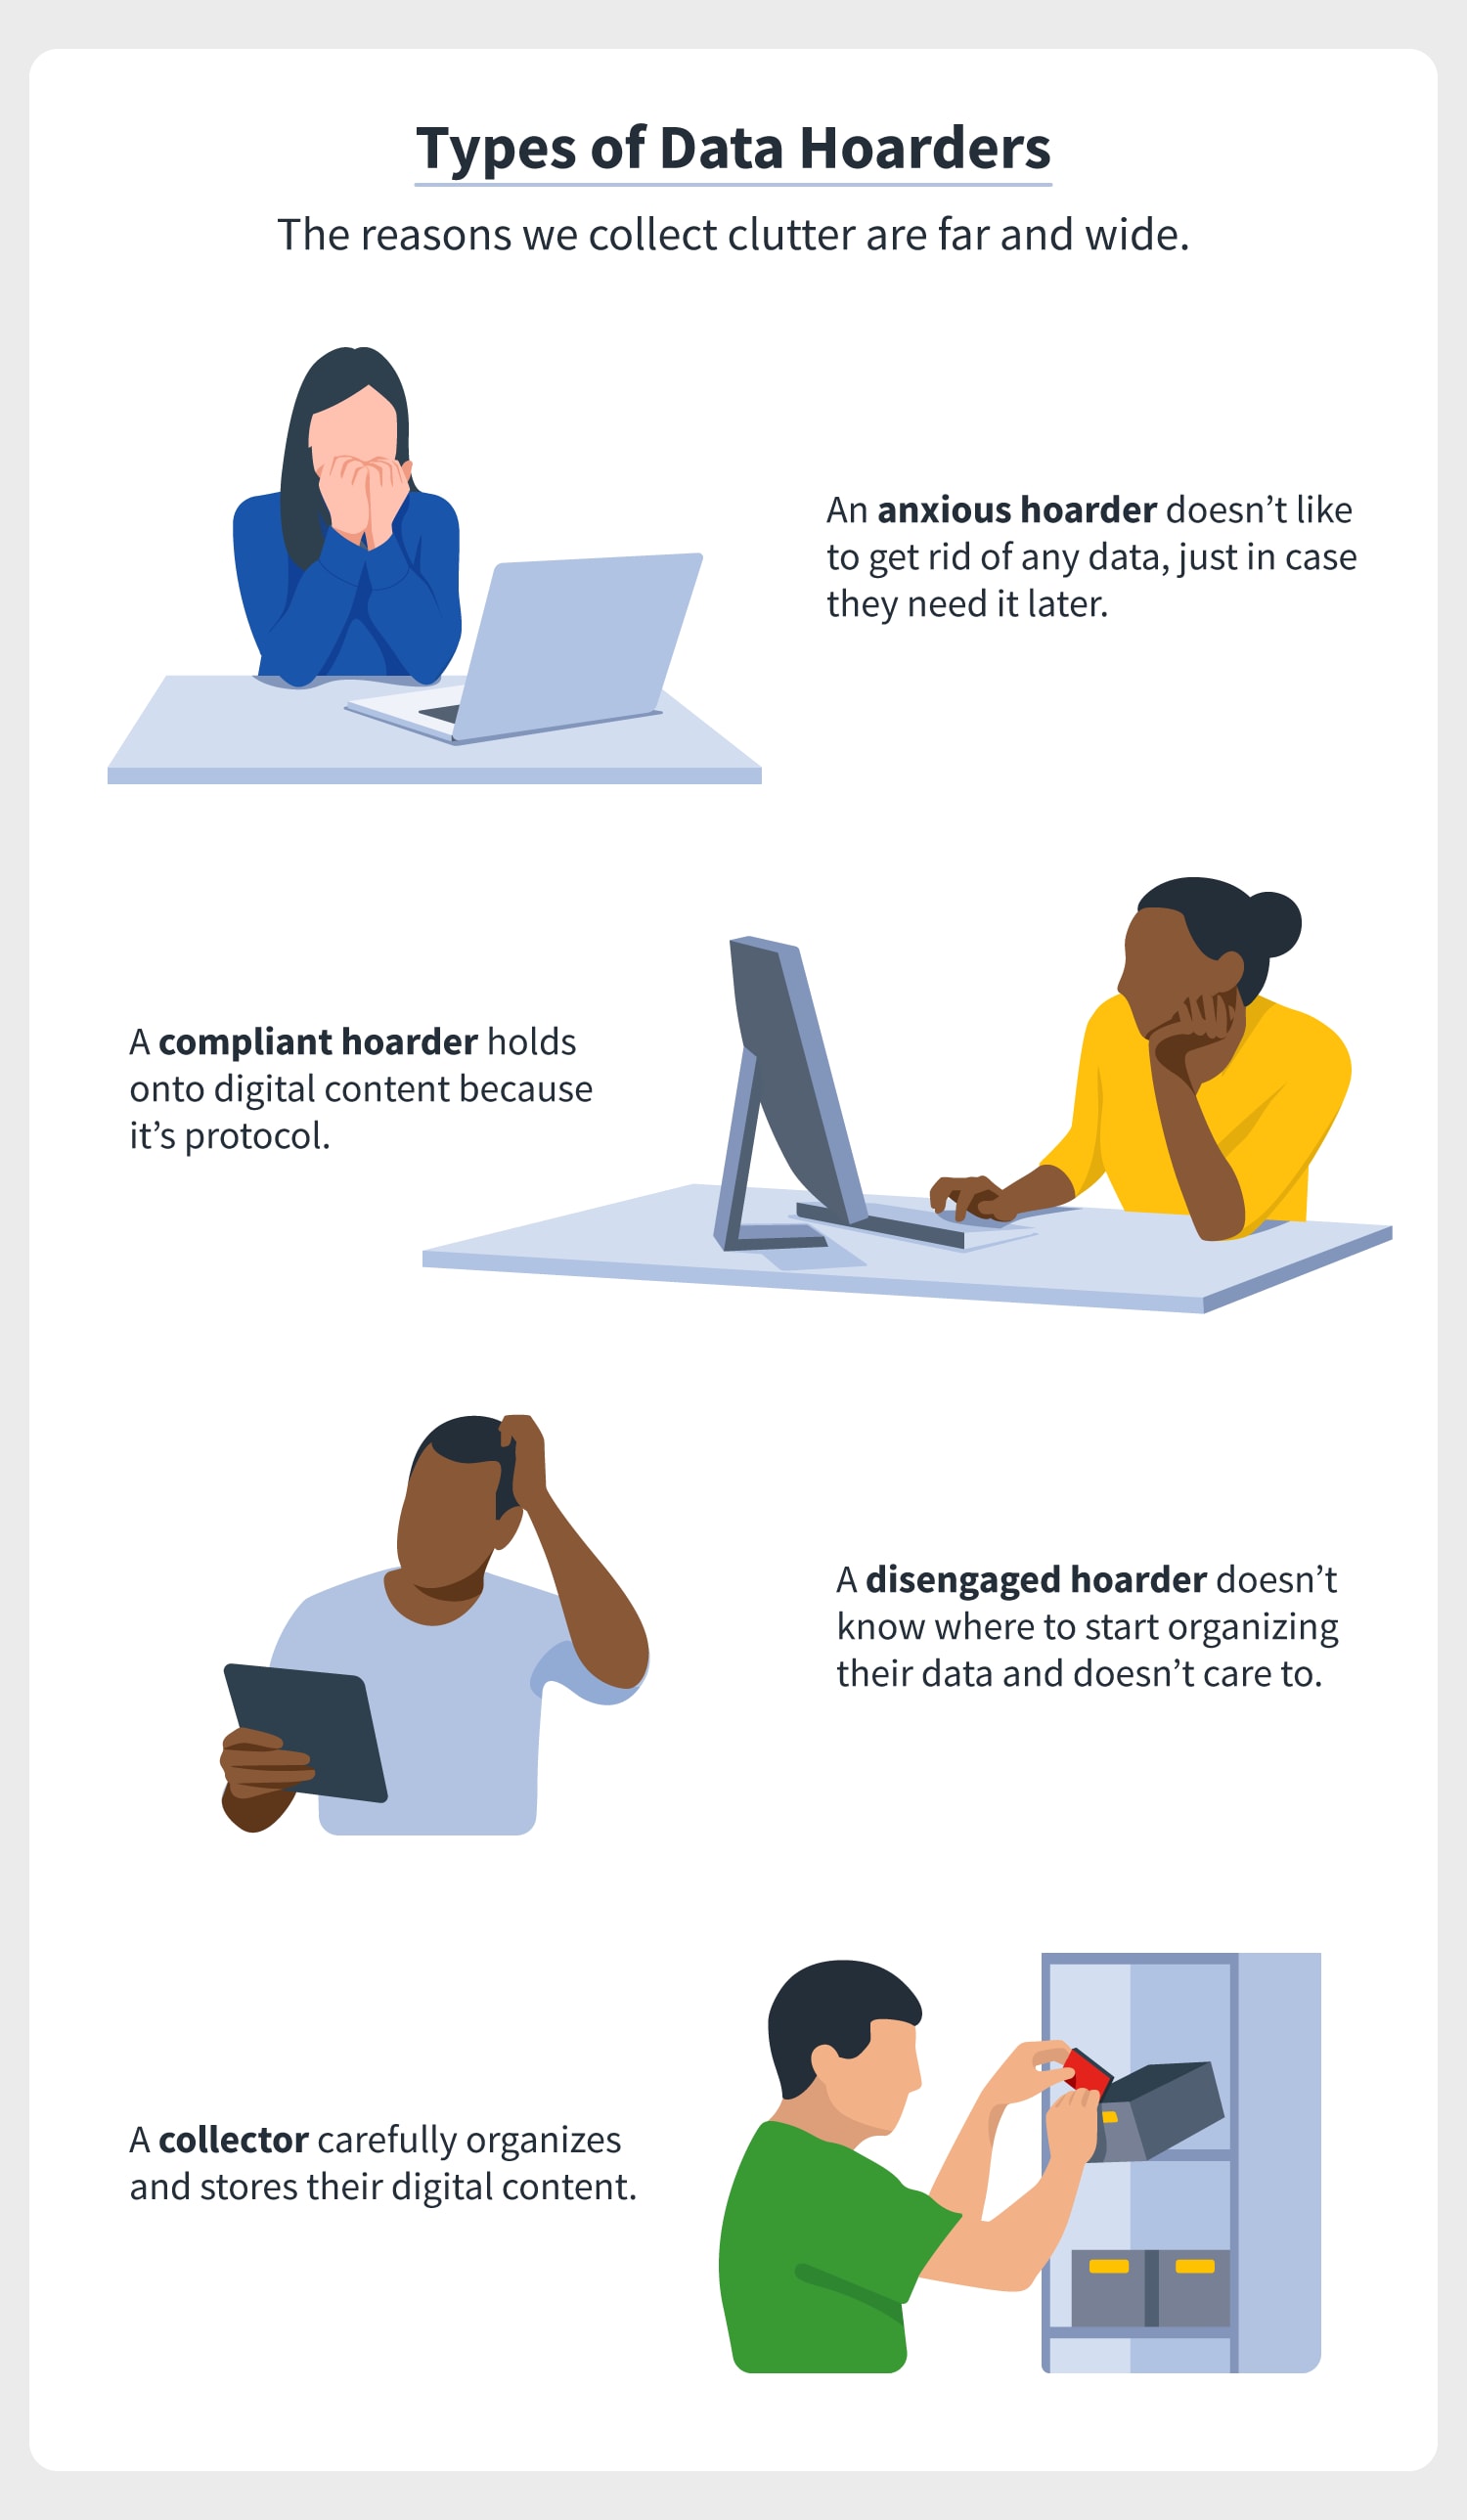 Types of data hoarders